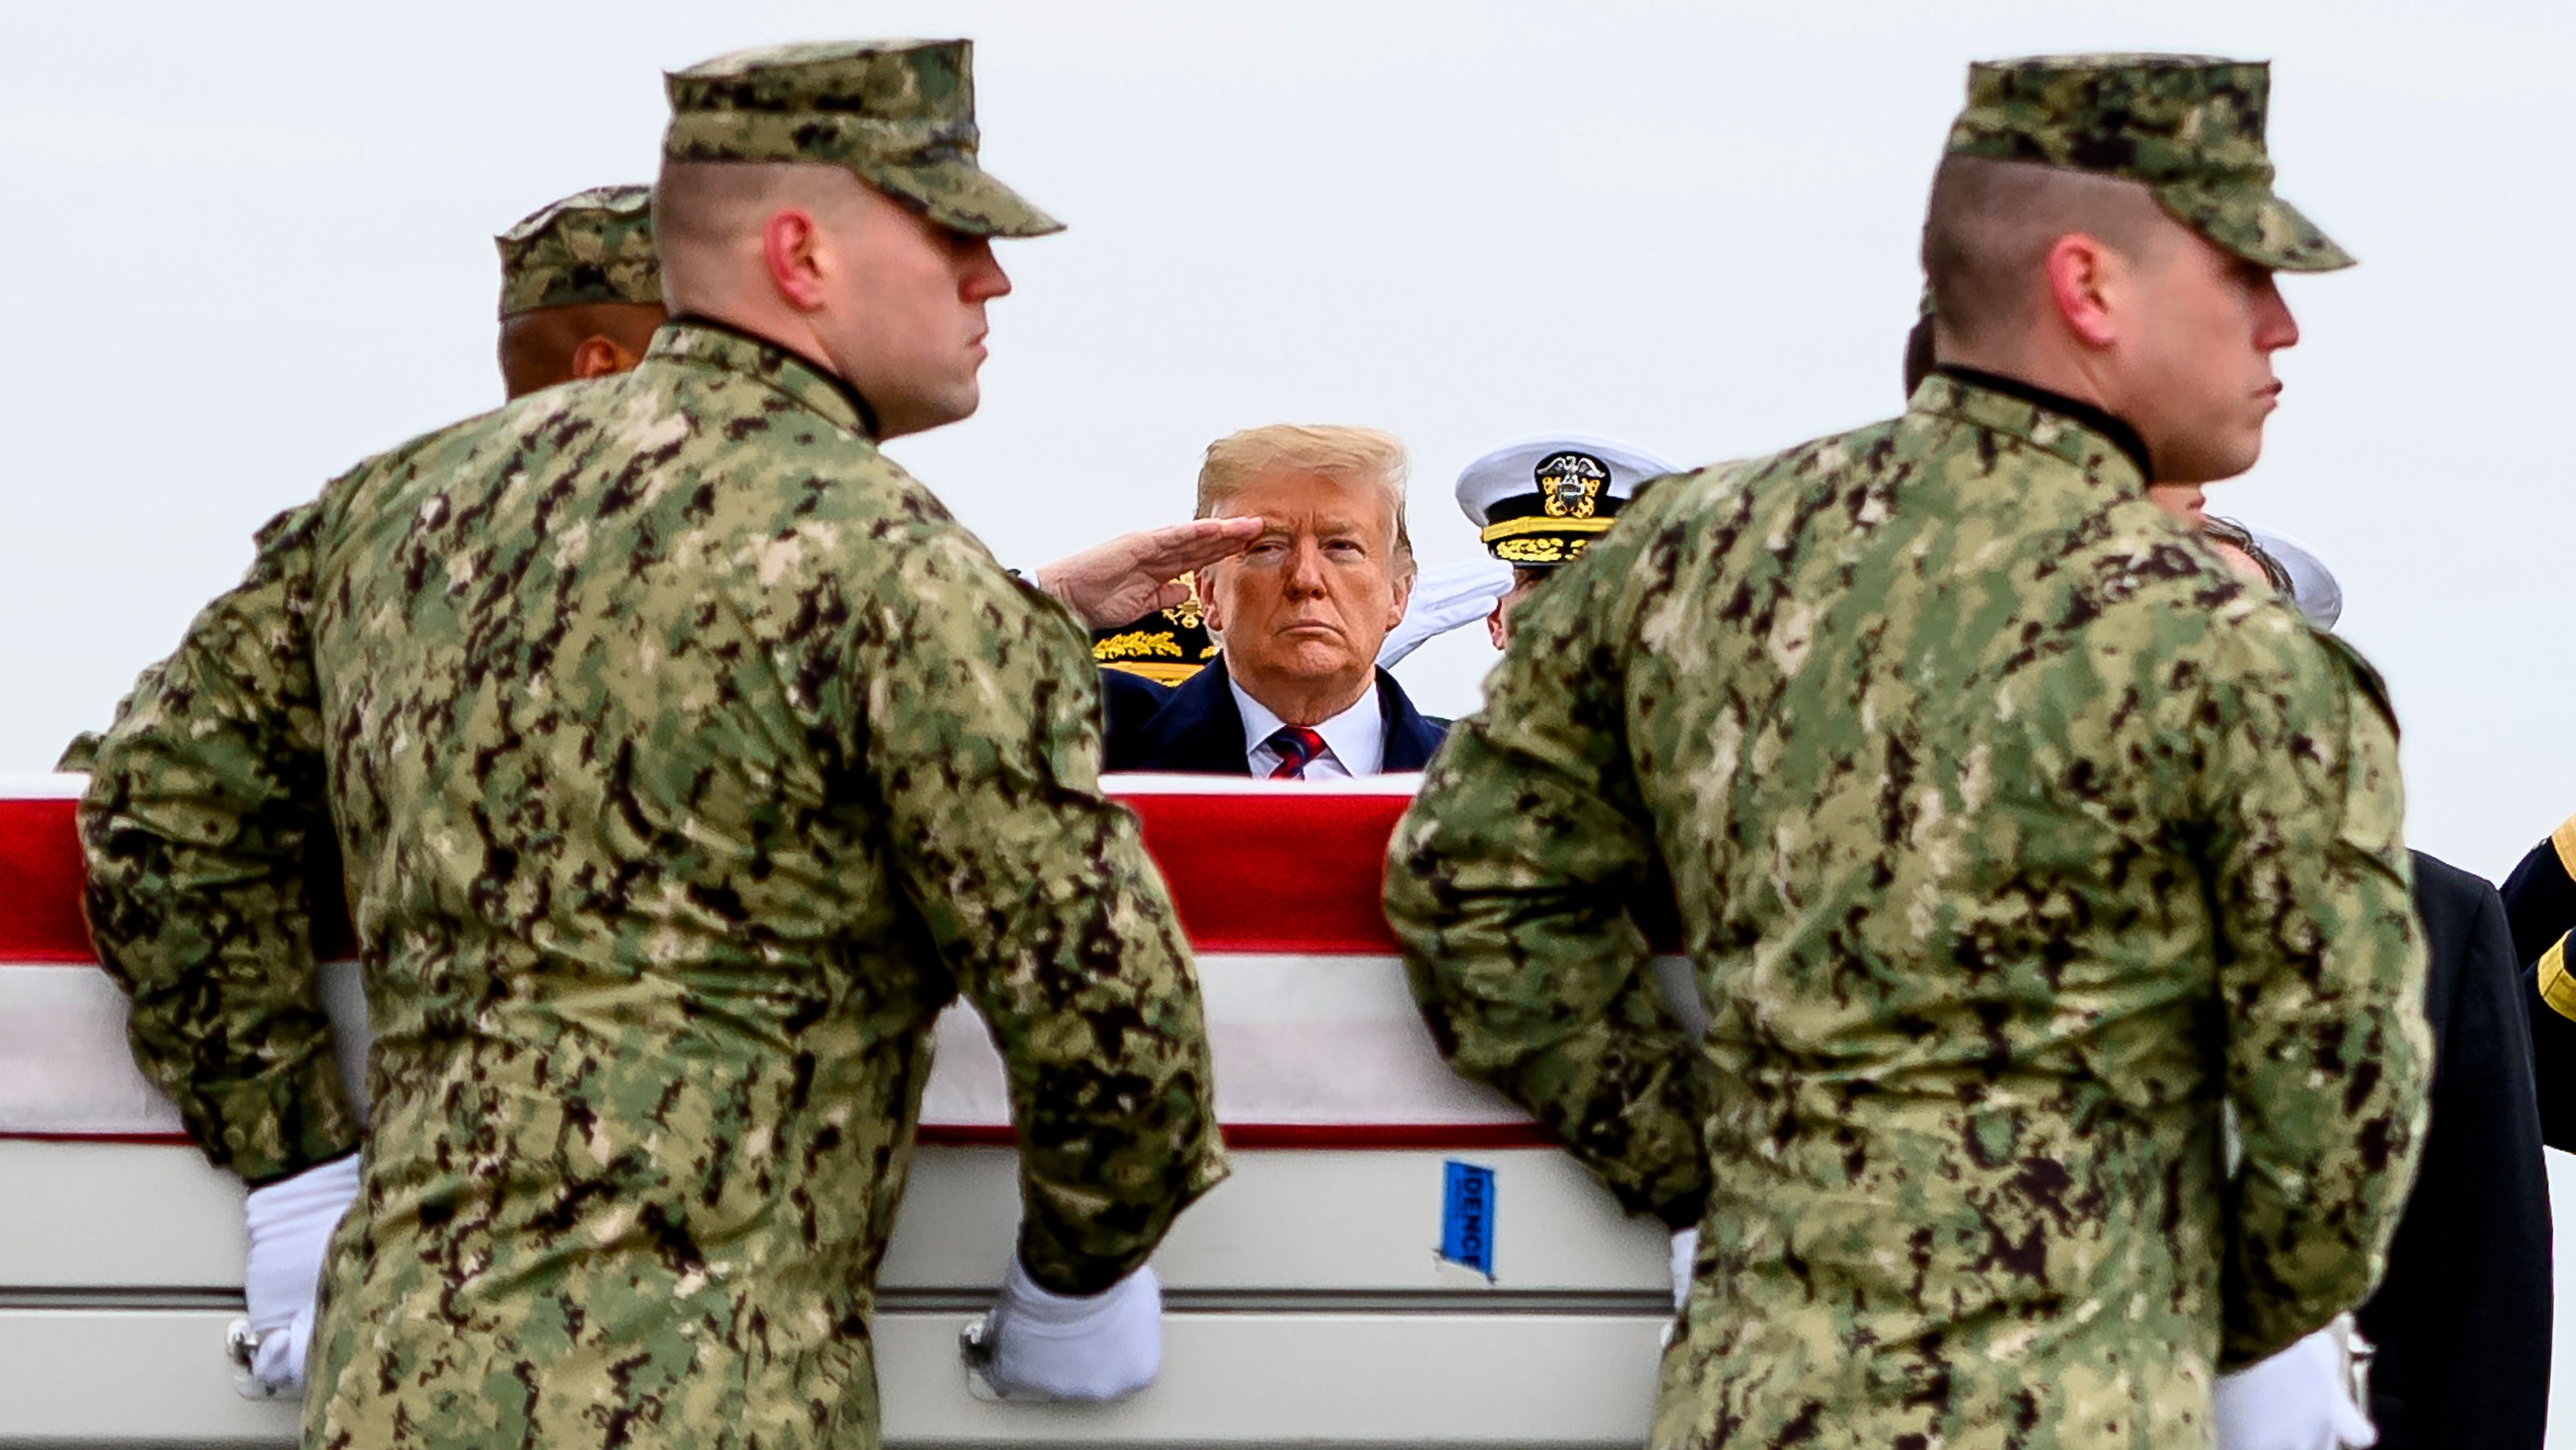 Trump visits Dover to honor remains of two soldiers killed in Afghanistan